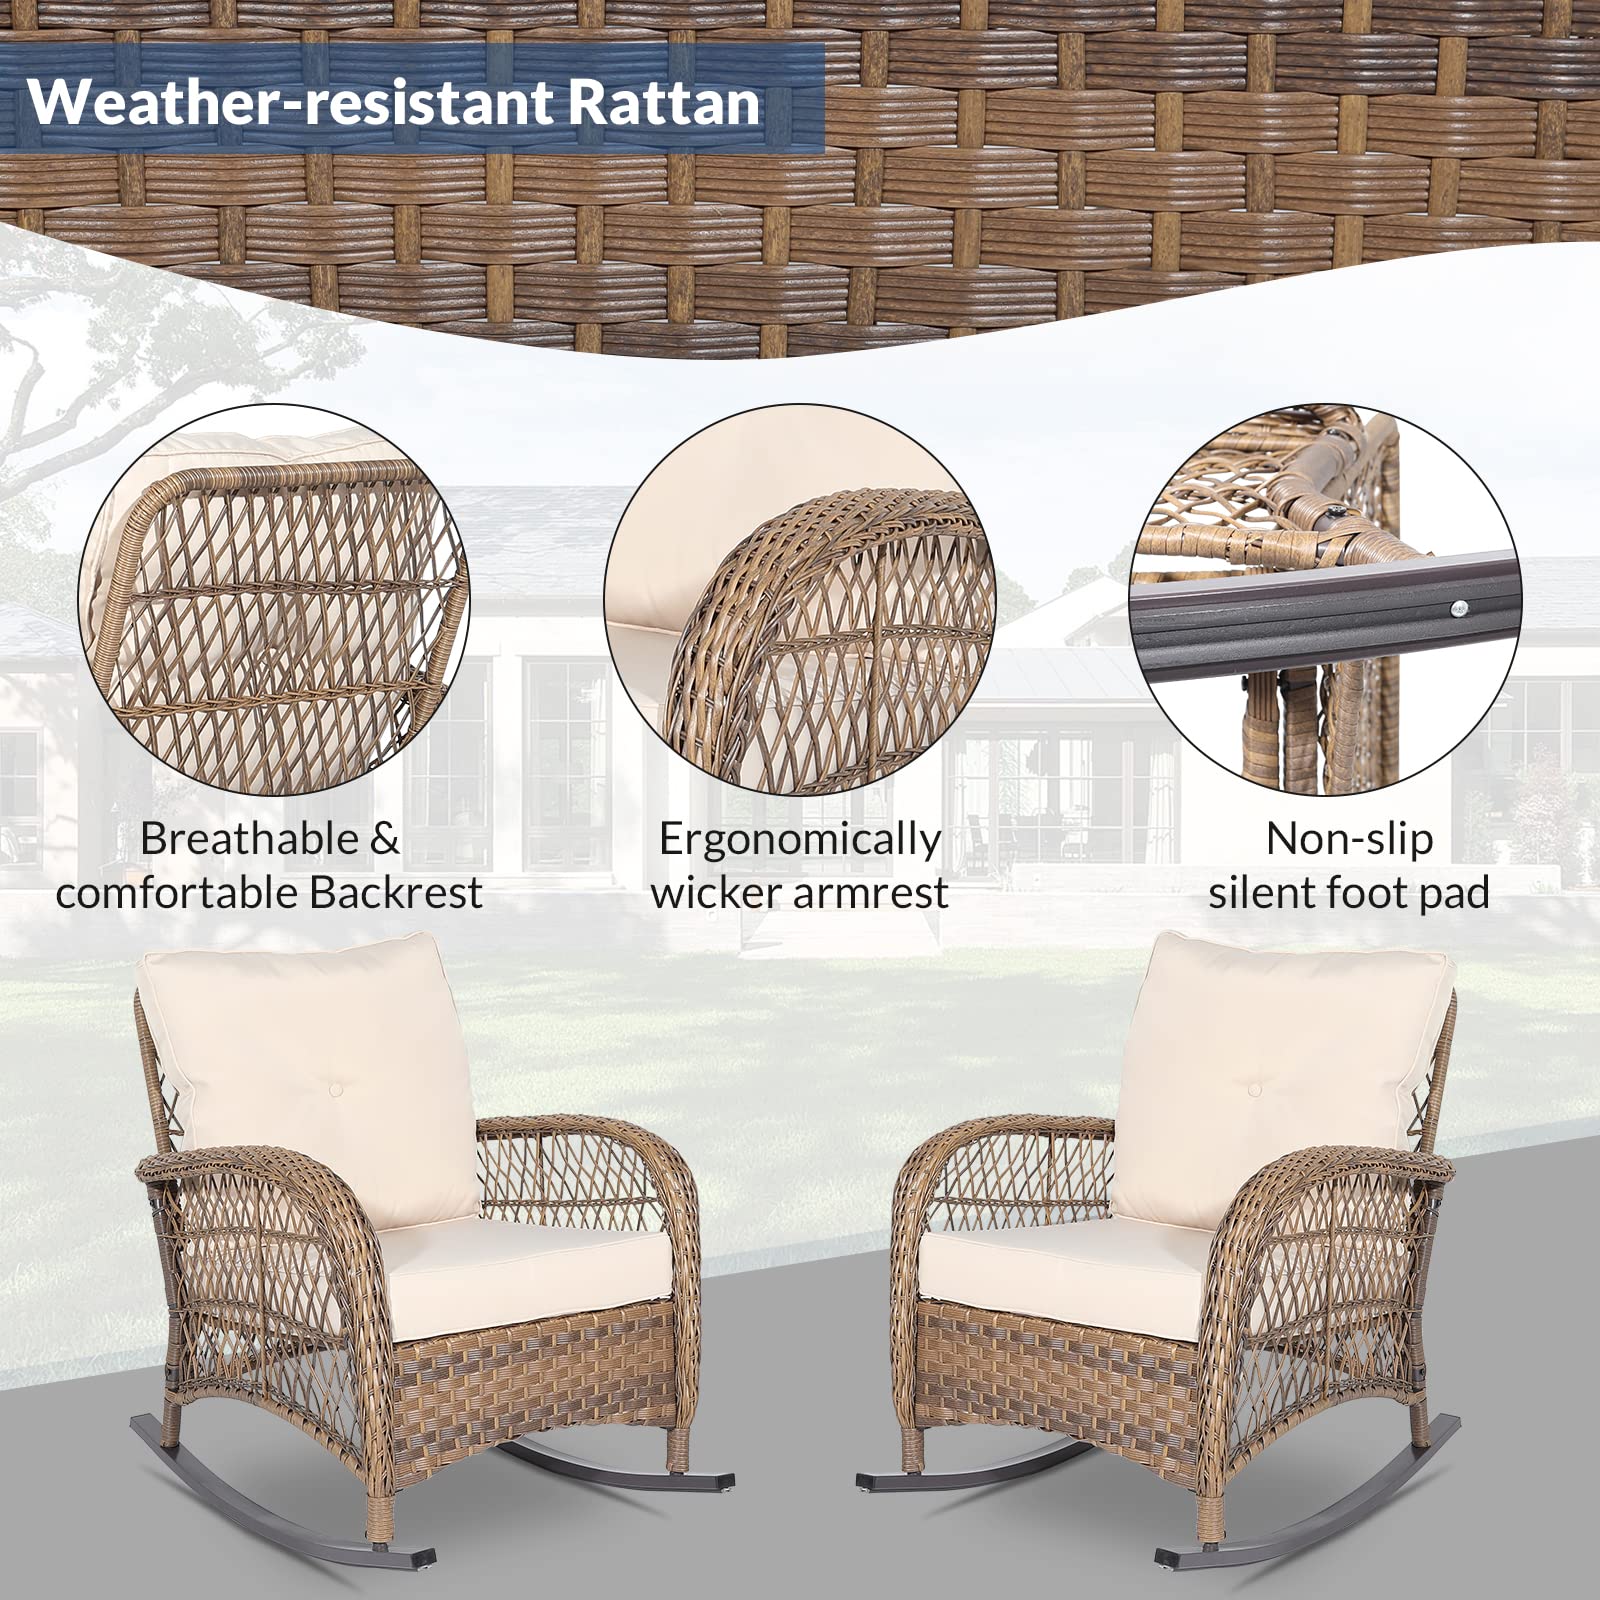 SOCIALCOMFY Outdoor Wicker Rocking Chair, Patio Rattan Rocker Chair with Steel Frame, Rocking Lawn Chair Patio Furniture, Light Brown Wicker & Beige Cushions, Set of 2 - image 4 of 7